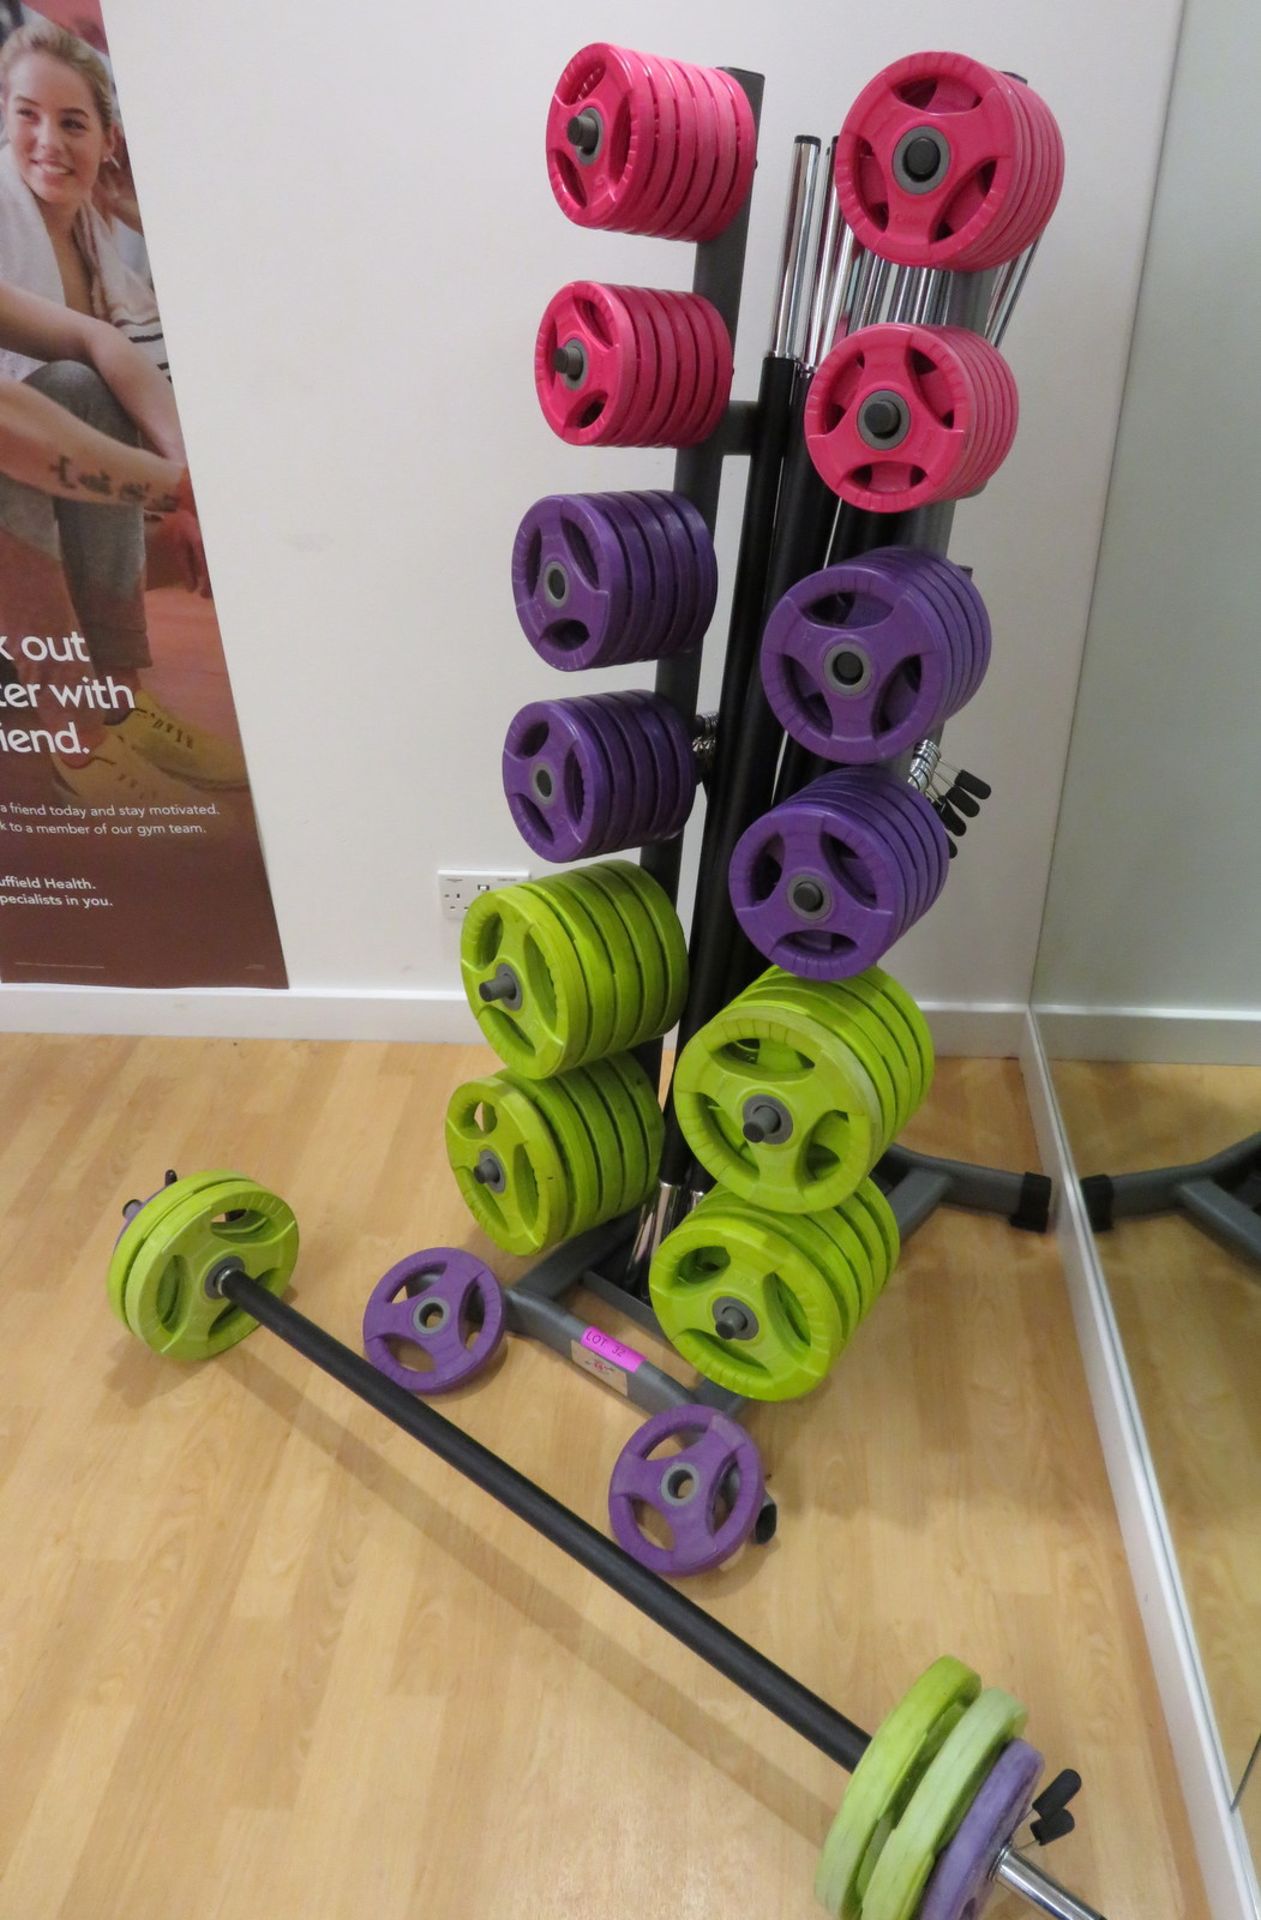 Physical Studio Weight Set Complete With Padded Bar. See Description For Contents. - Image 2 of 6